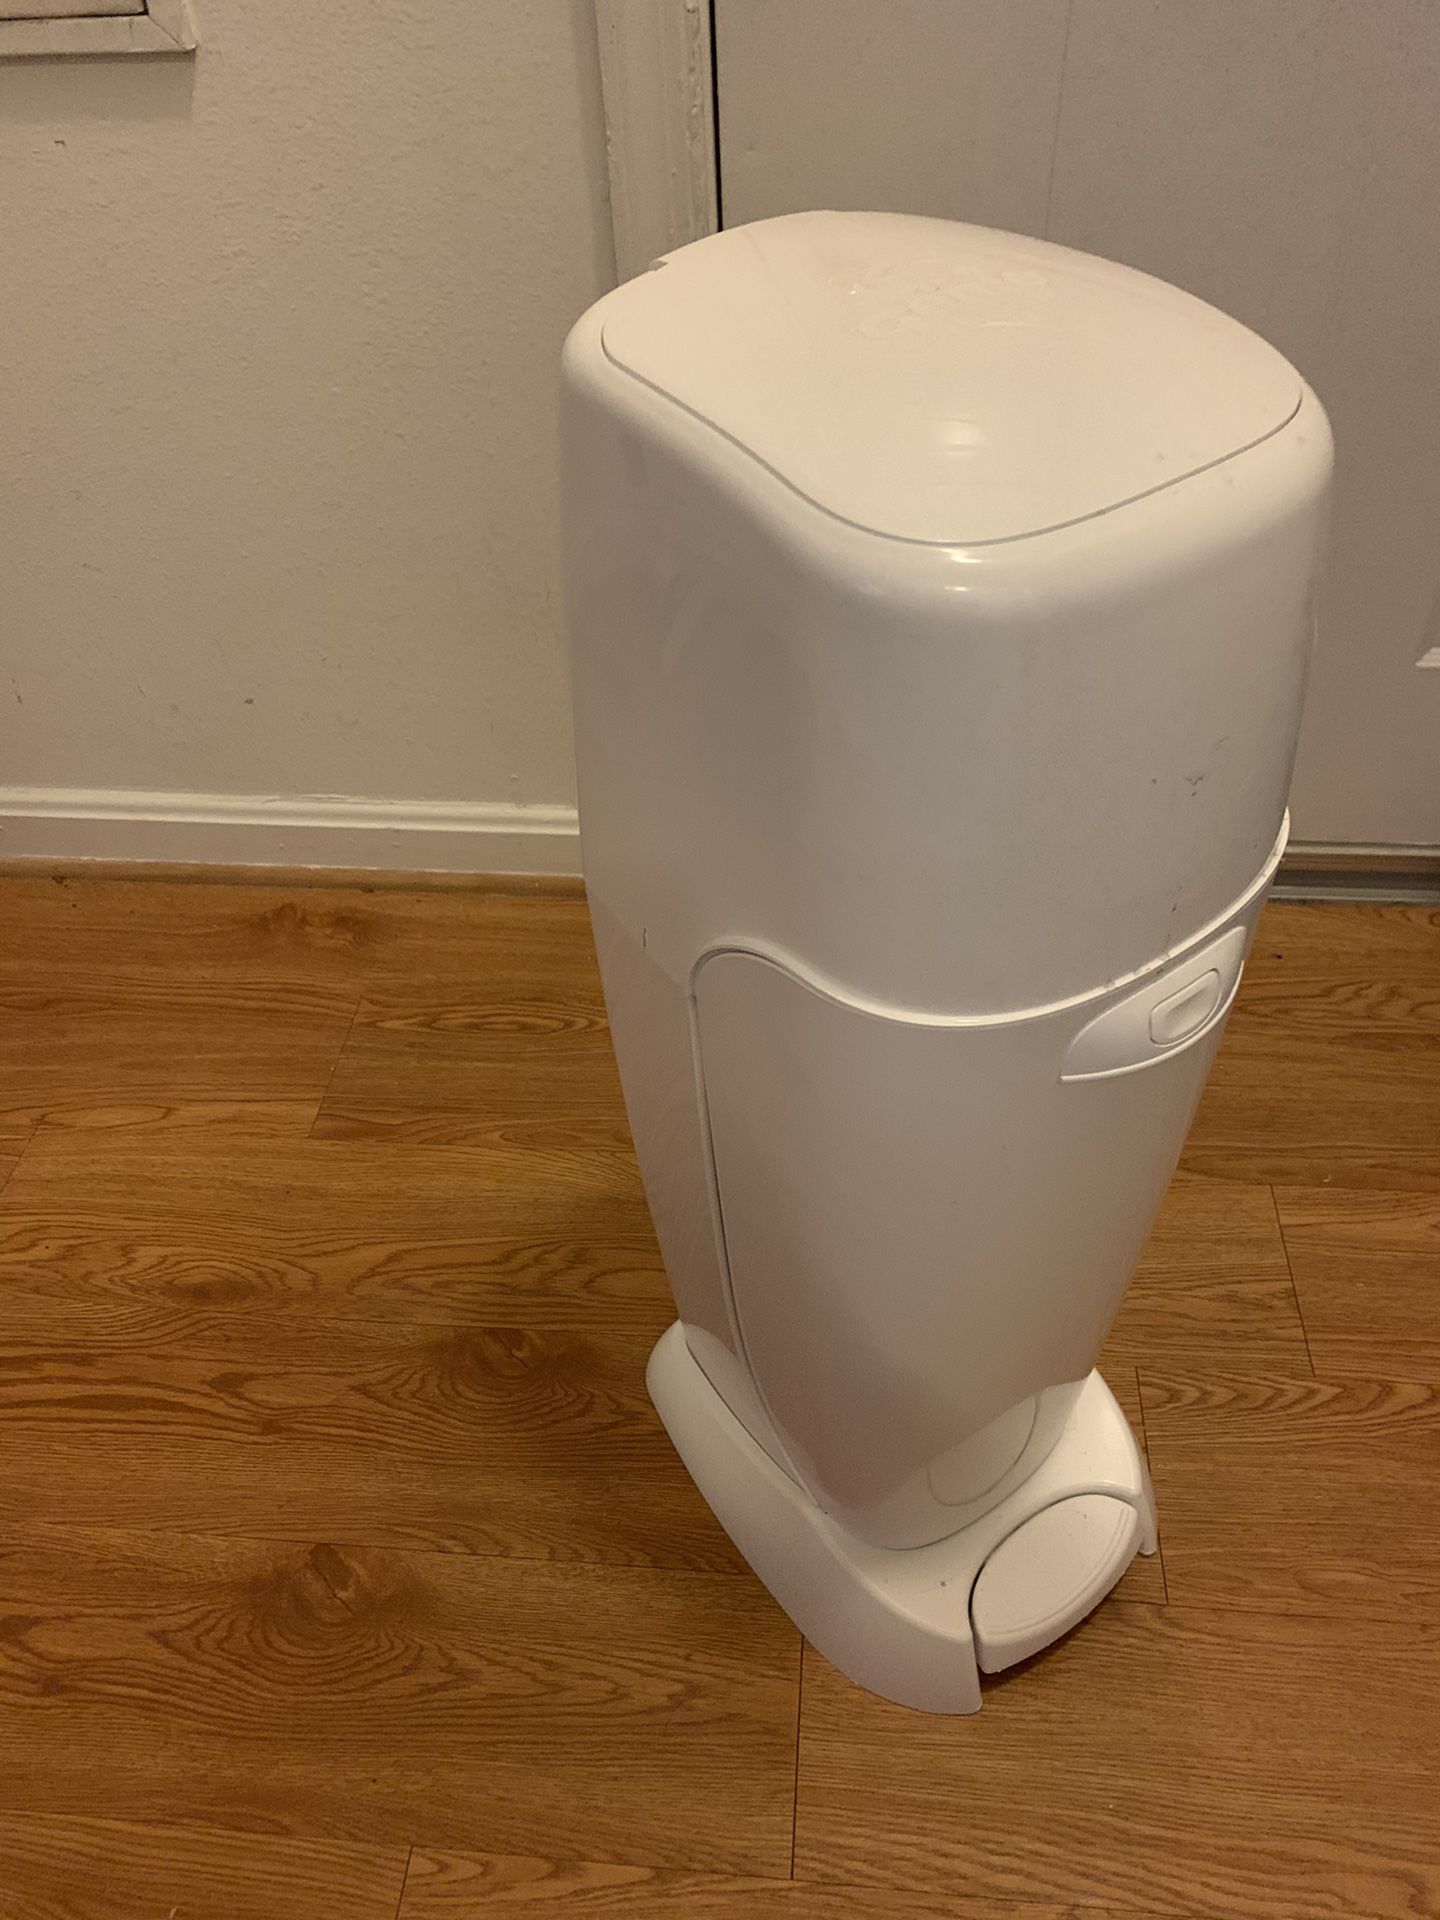 Diaper genie / diaper pail - used once